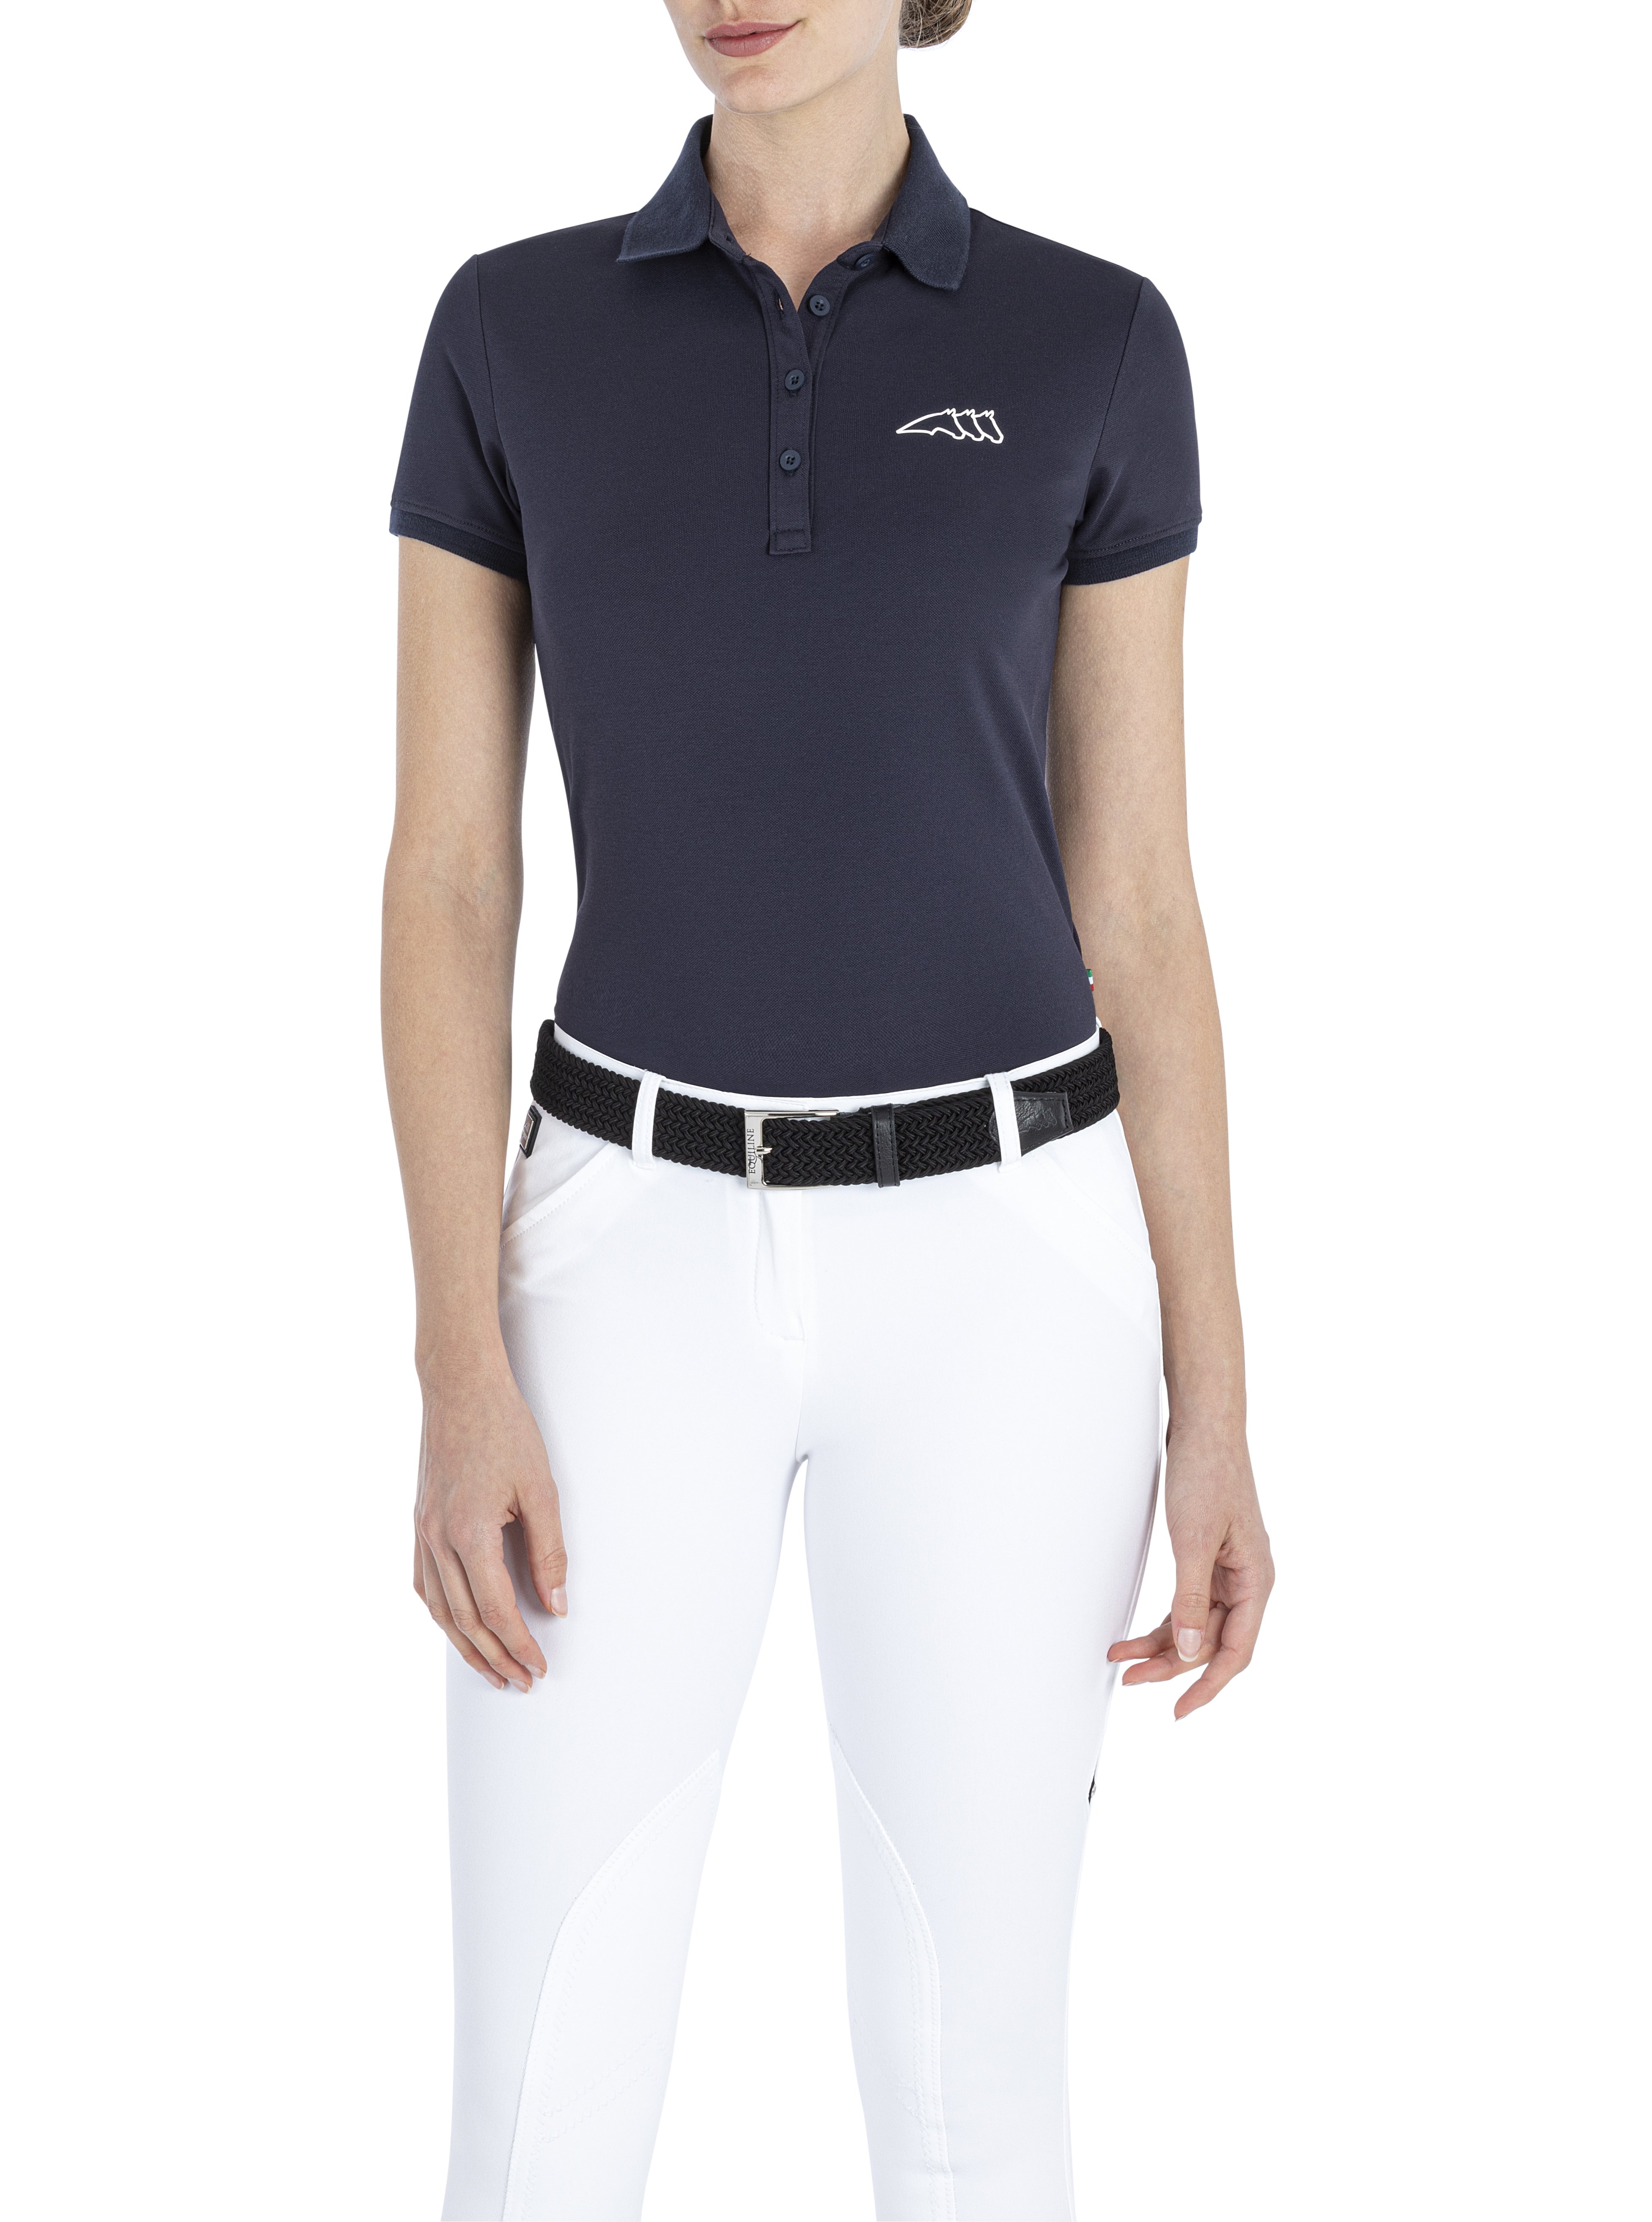 Equiline Crisc Polo - Navy 